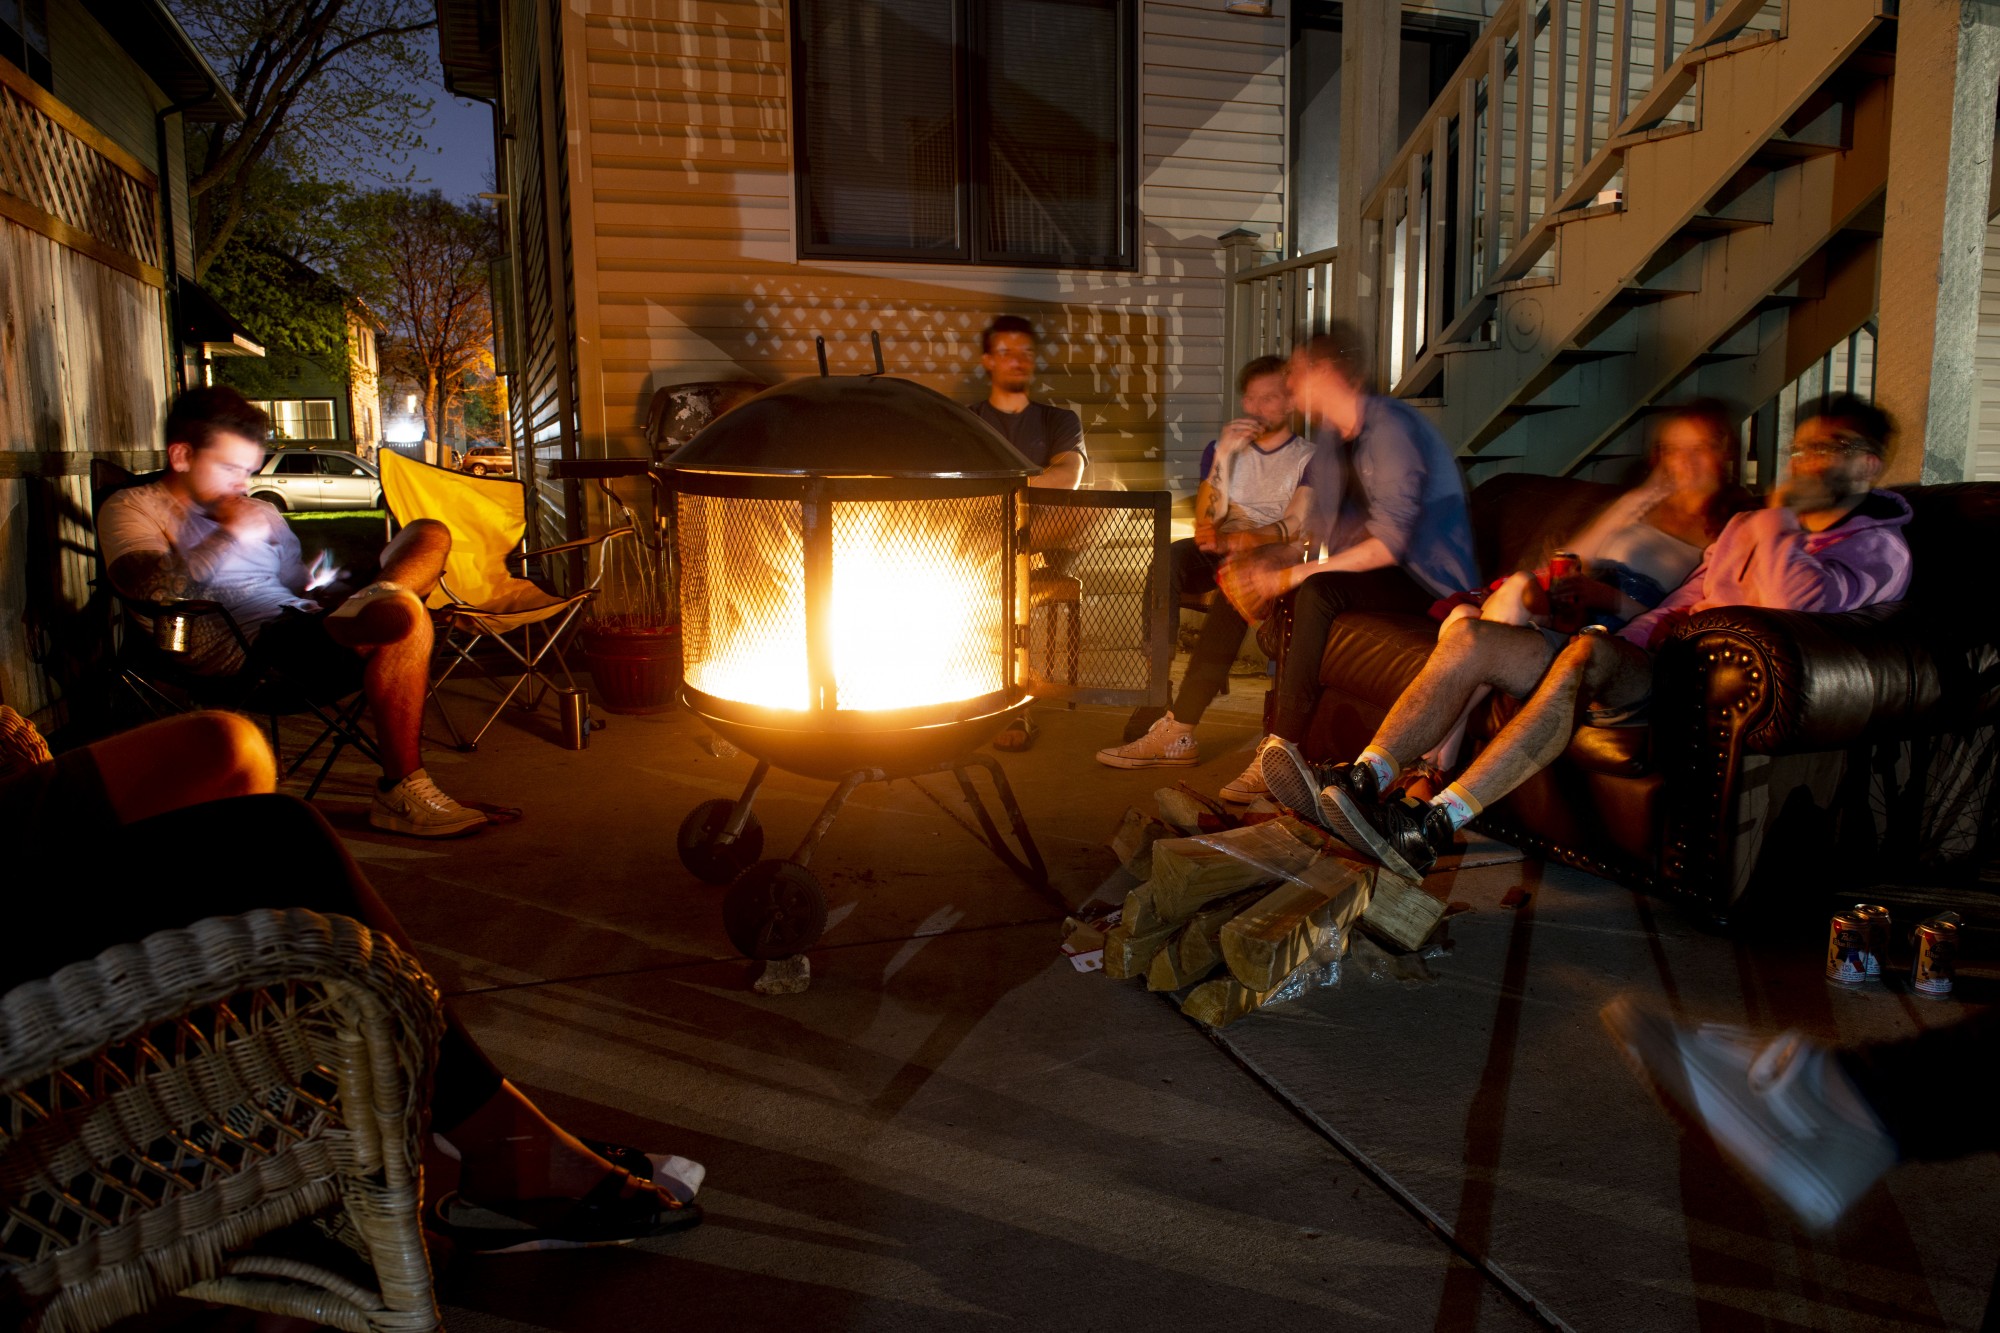 10:29 p.m.
Students gather around a fire behind their home in Dinkytown. 